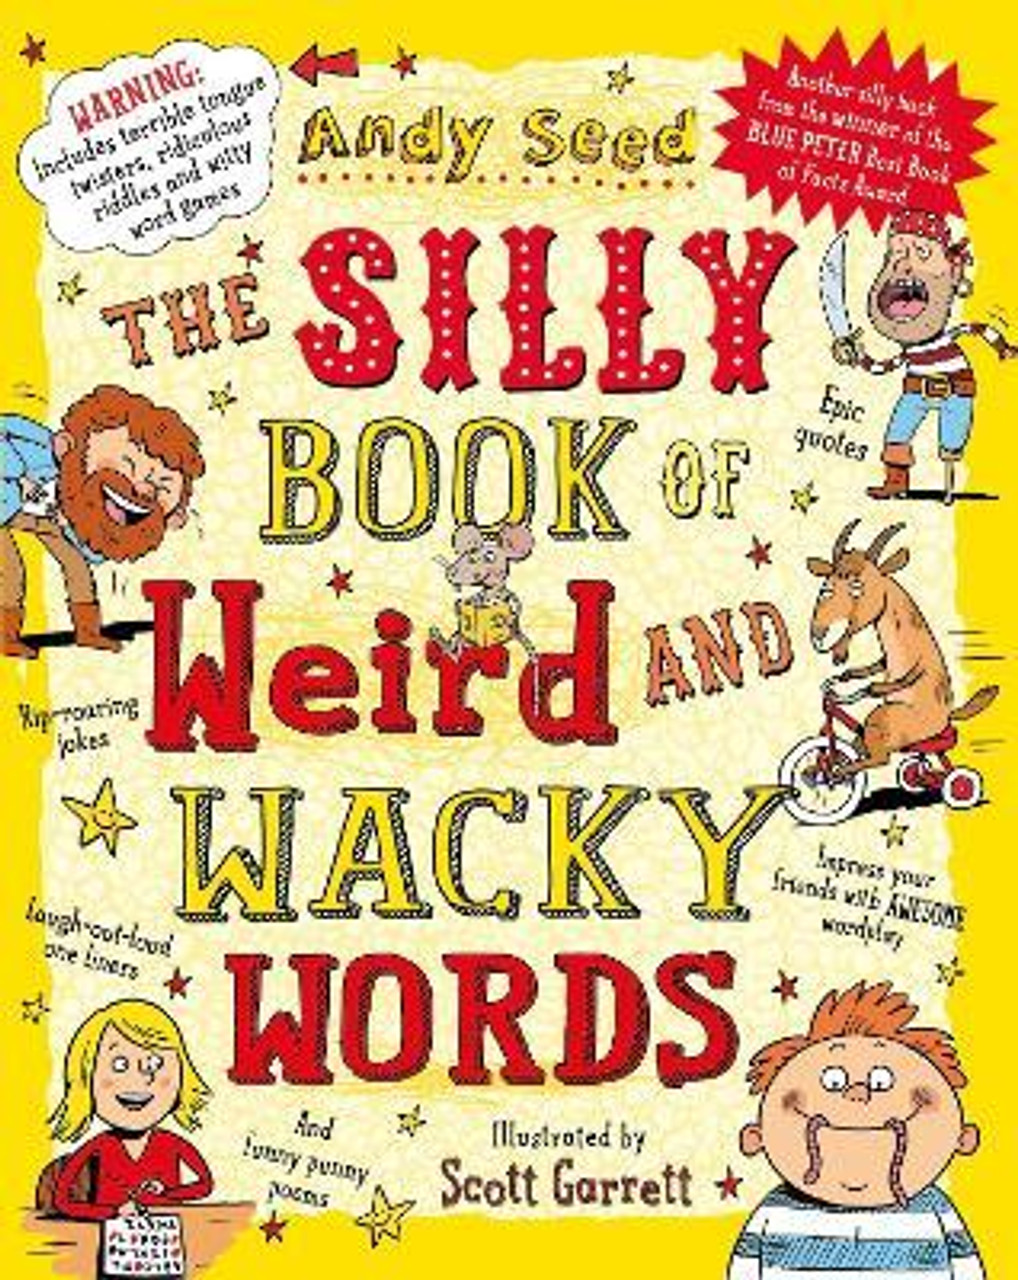 Andy Seed / The Silly Book of Weird and Wacky Words (Large Paperback)